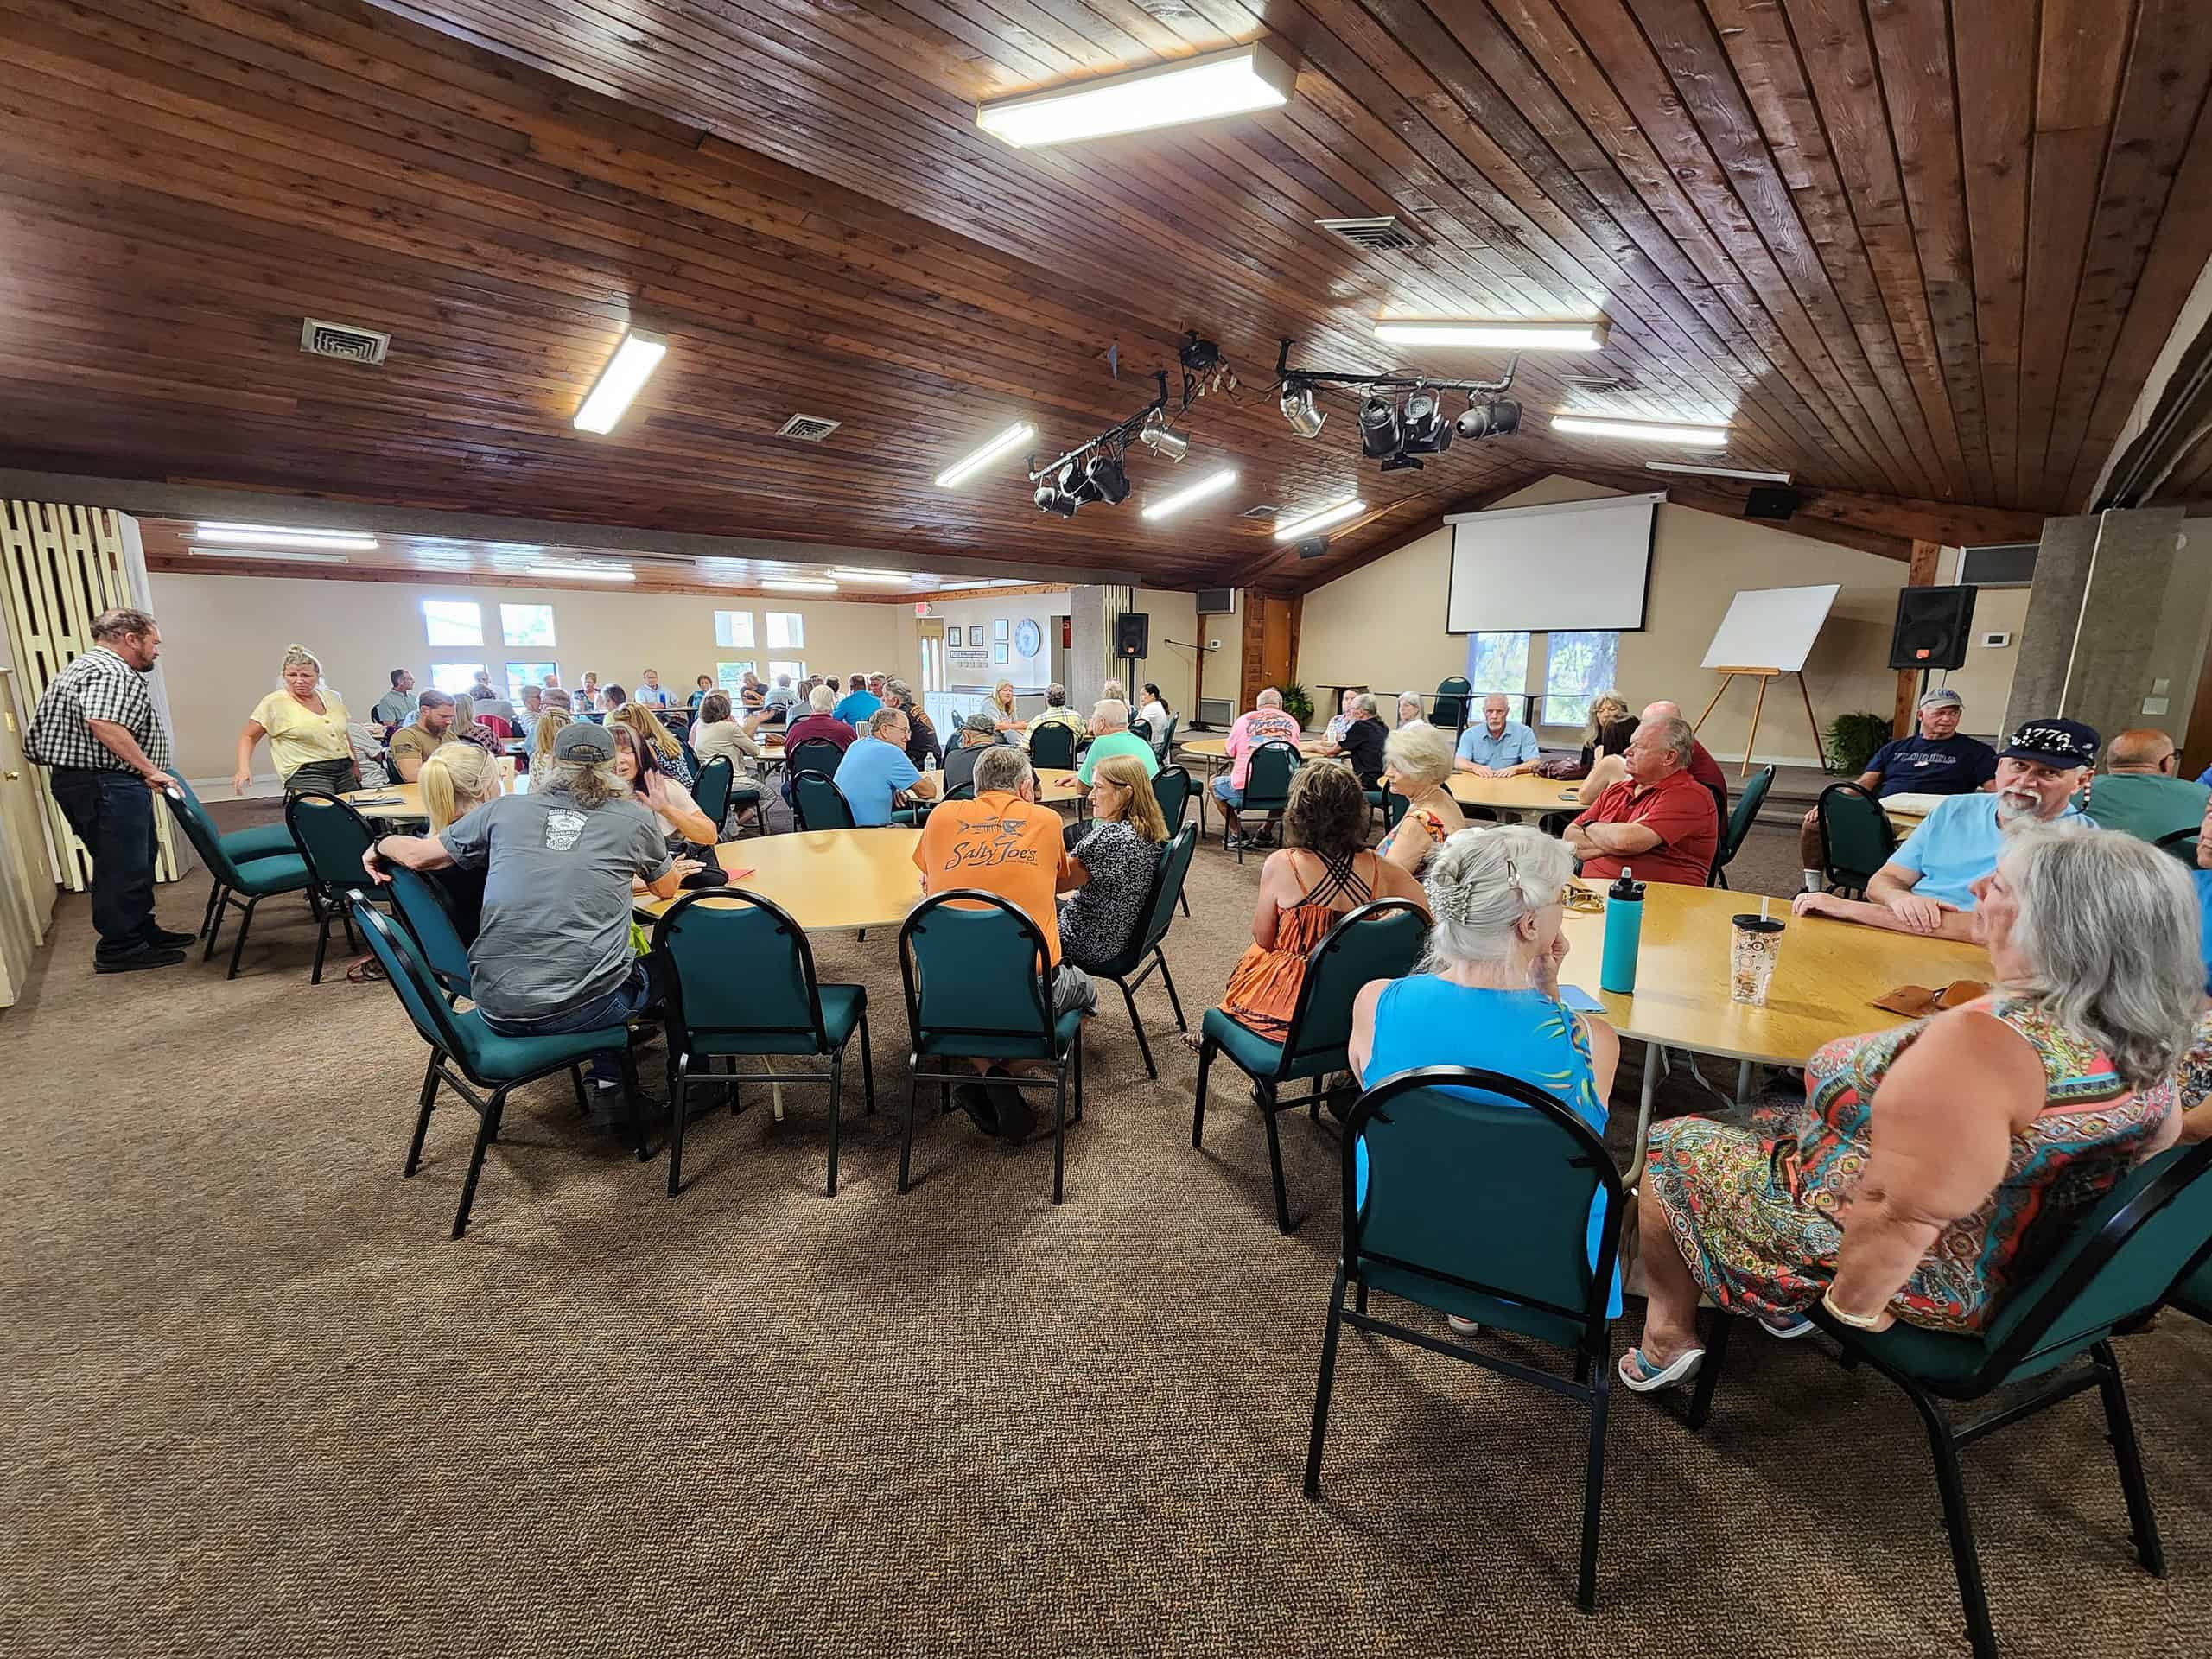 Dozens of disgruntled property owners attended Thursday's special neighborhood meeting. [Photo by Austyn Szempruch]